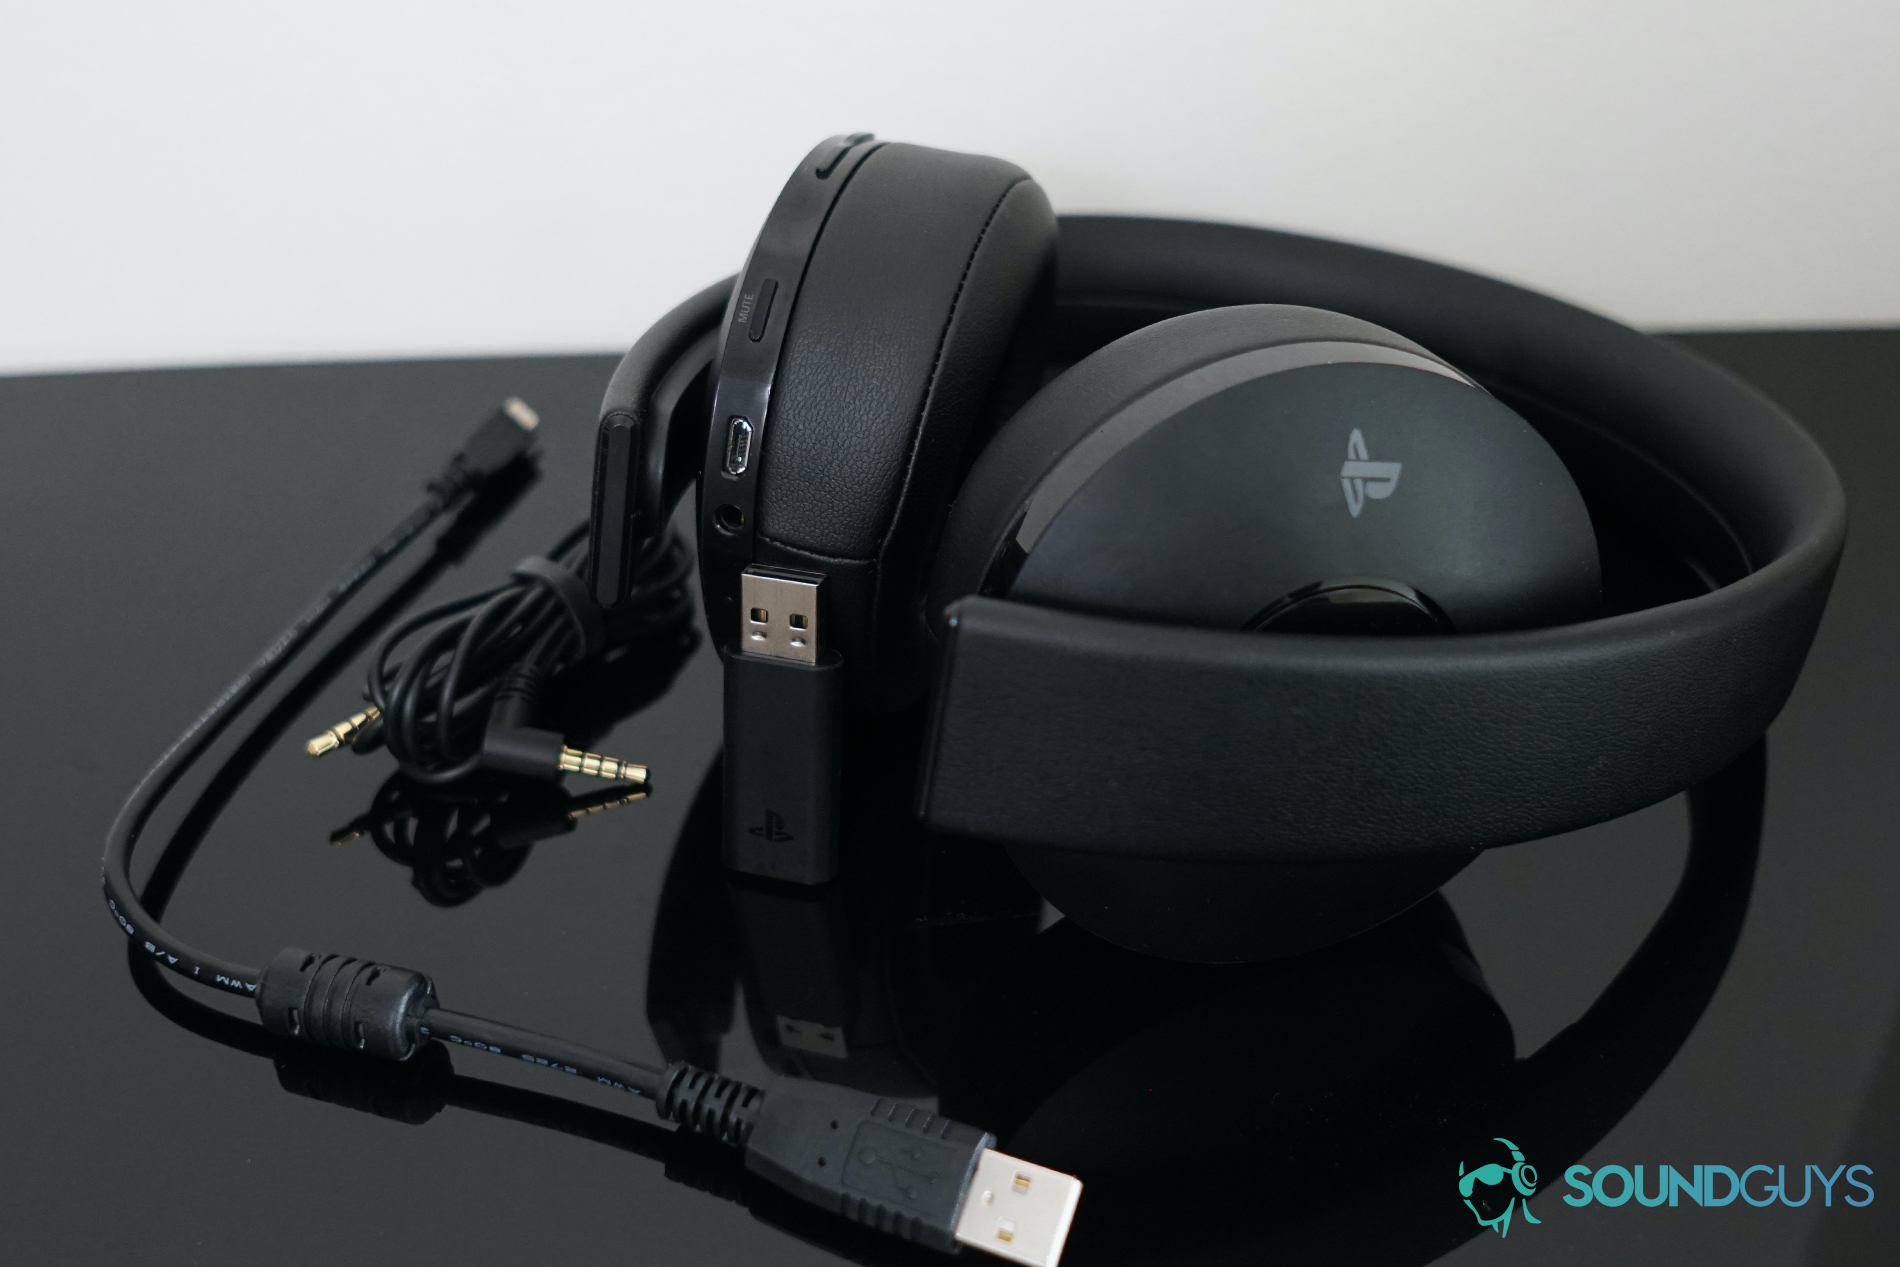 The Playstation Gold Wireless Headset lies on its side with its USB stick and connection cords.